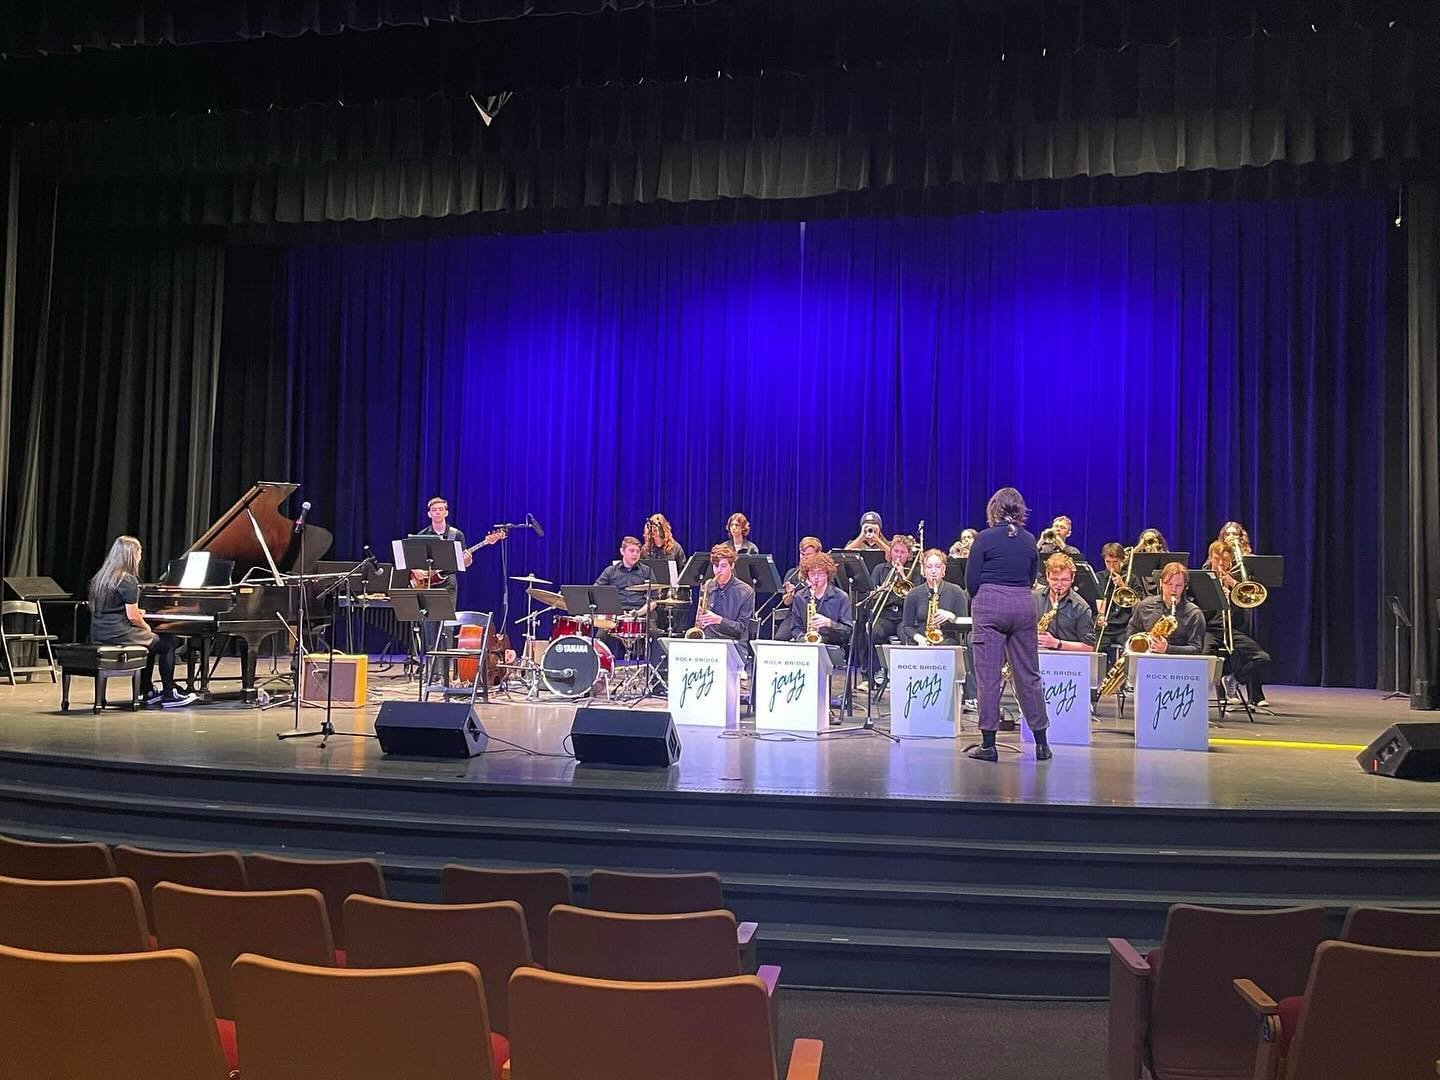 The RBHS Jazz Ensemble had a wonderful performance yesterday at the 18th and Vine Jazz Festival in Kansas City! Congratulations to the students, Patrick Sullivan, and student teacher Nicole Tinsley for a job well done! Students and staff had an amazi